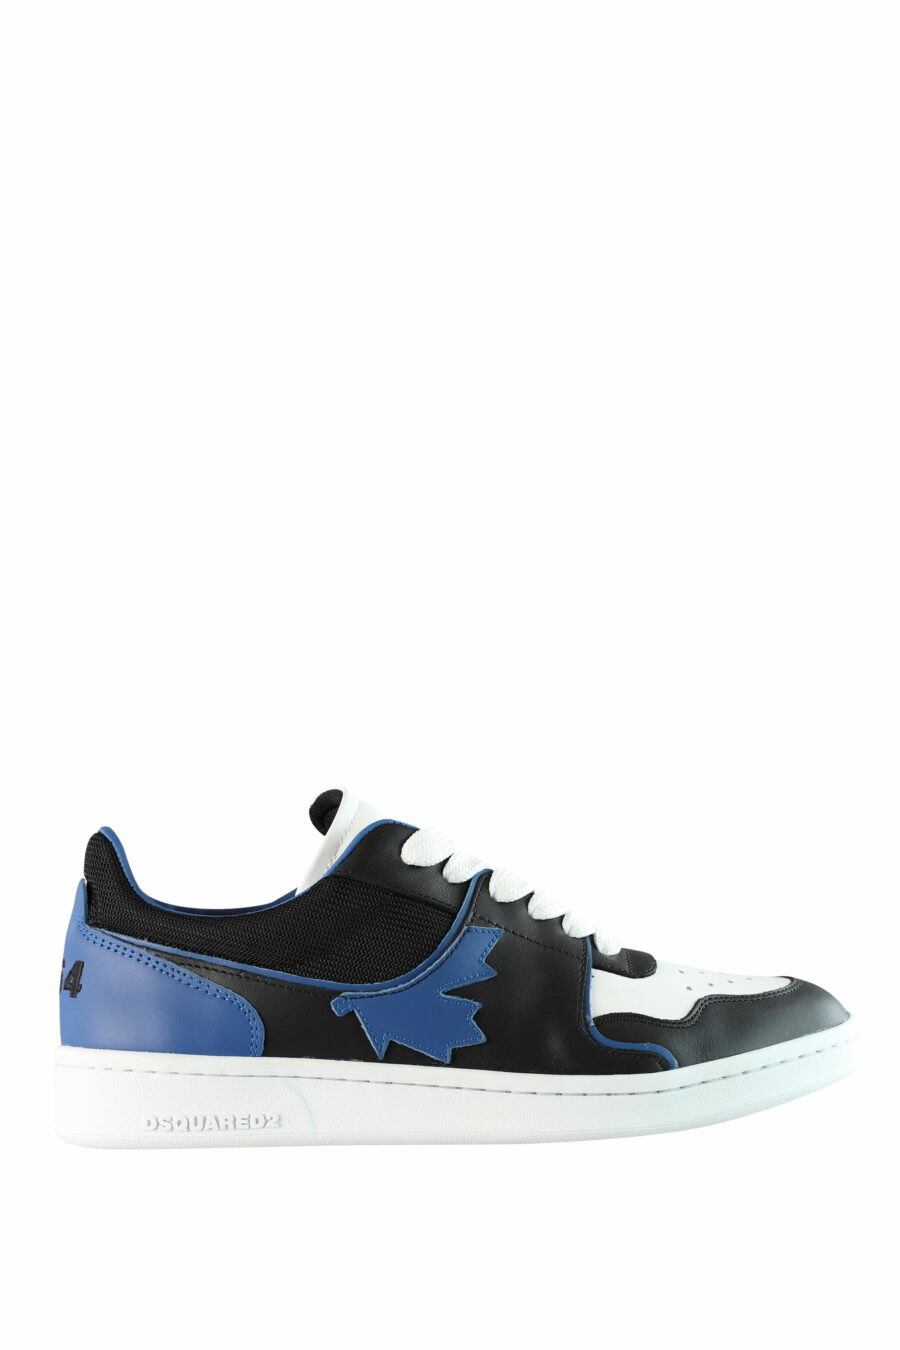 Bicolour black and blue "boxer" trainers with white details - IMG 1545